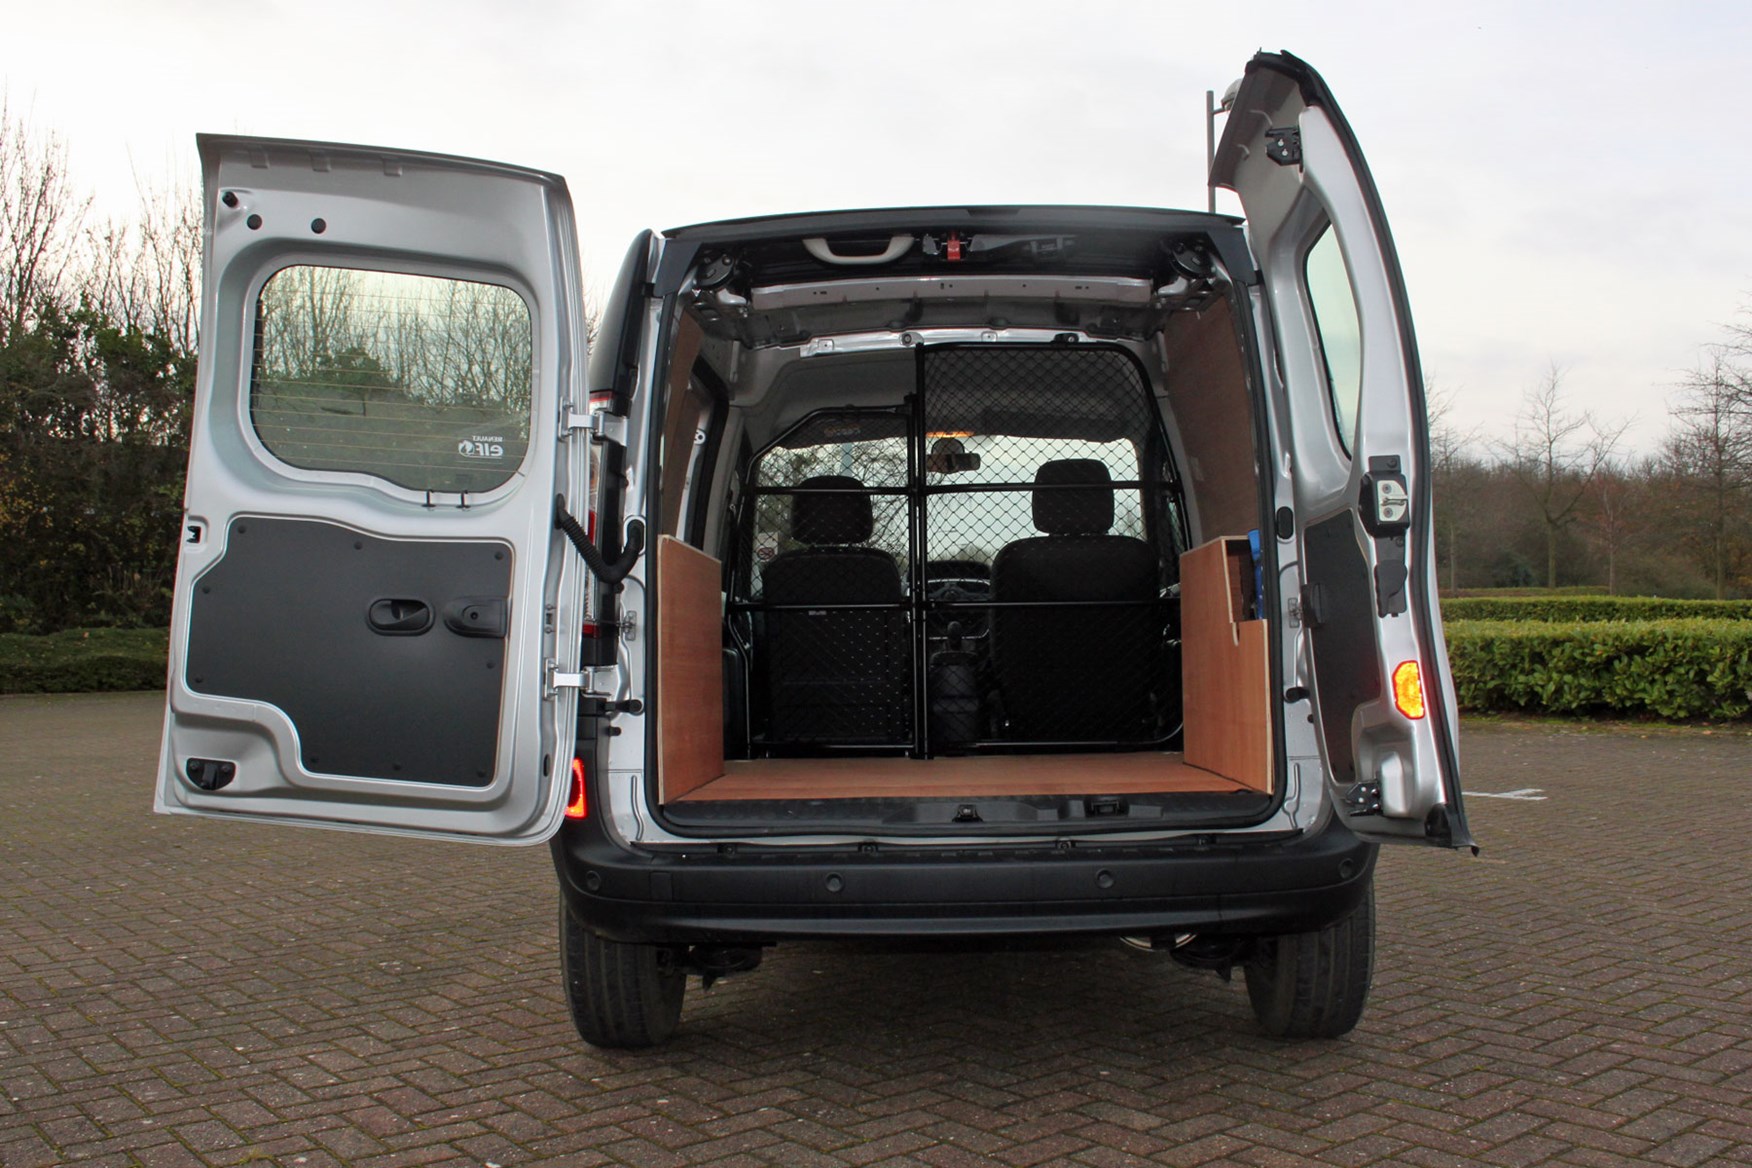 Renault Kangoo Sport review - load space and rear doors